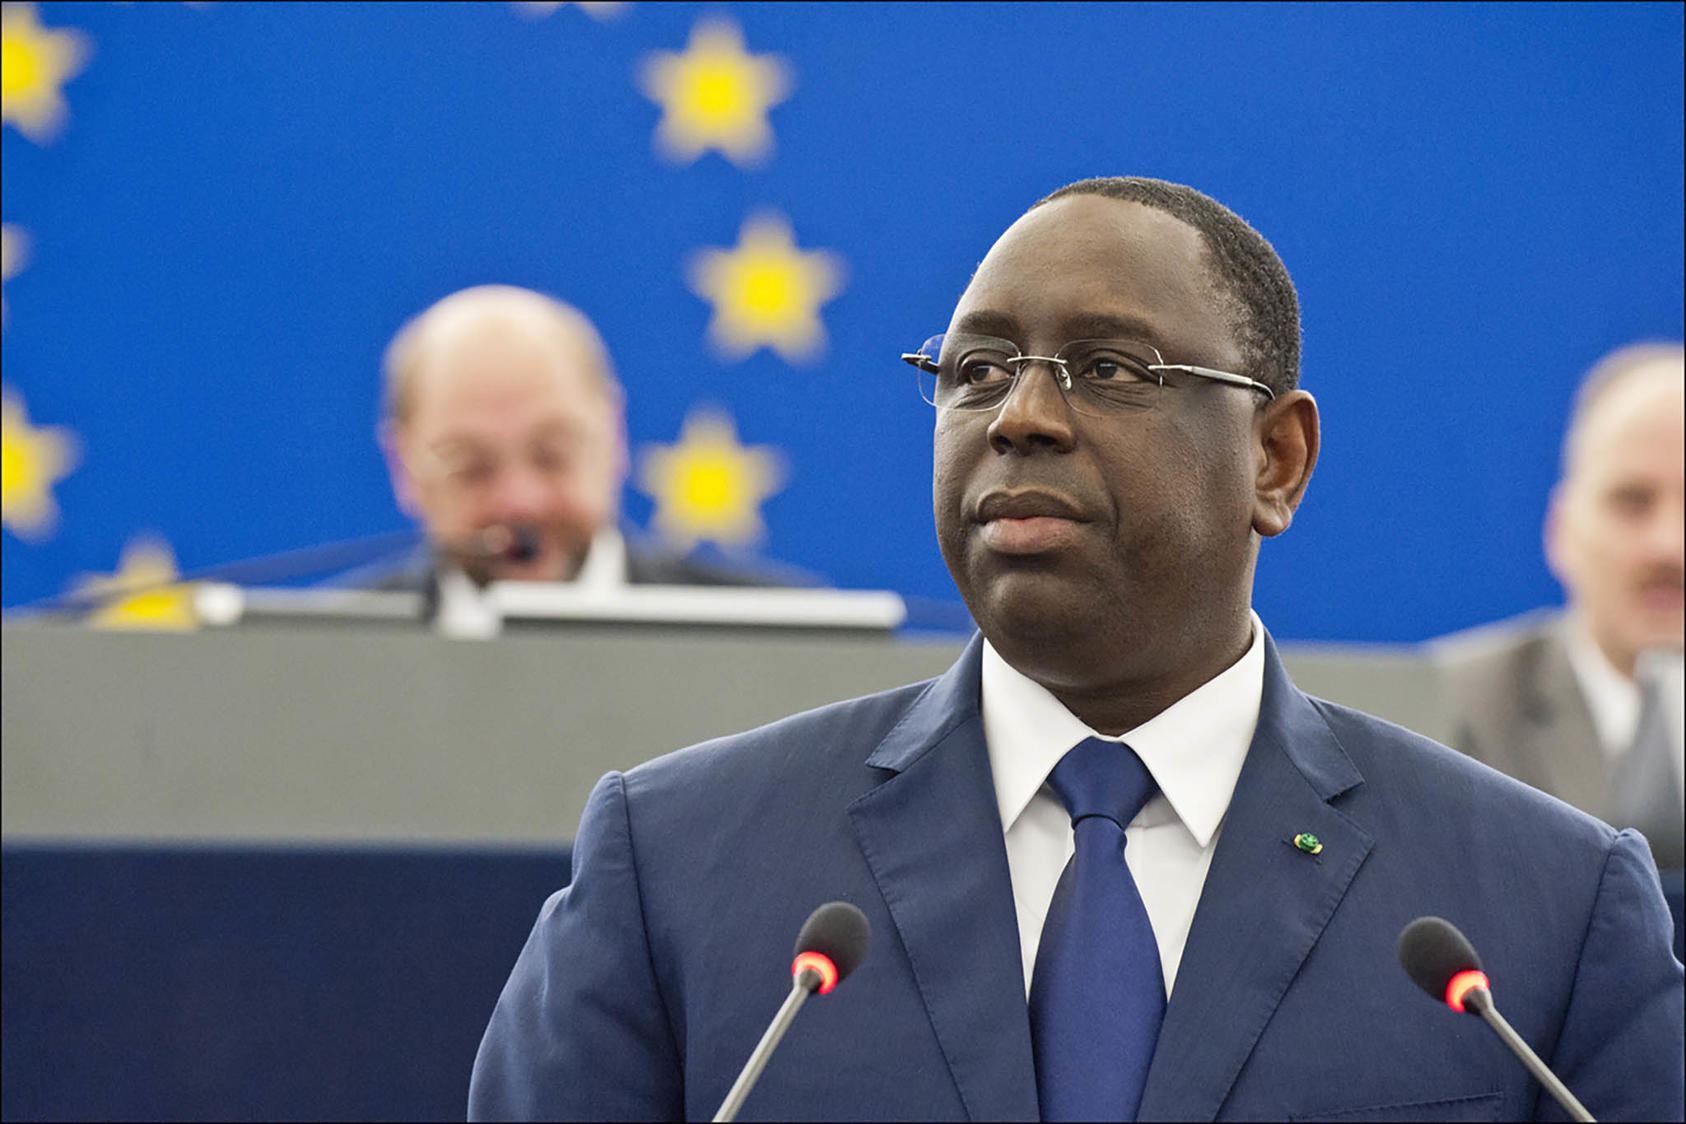 Senegalese President Macky Sall addresses European legislators after his first election in 2012. Sall has delayed the election of his successor, who by law should take office when his second term ends in April. (CC License/European Parliament)